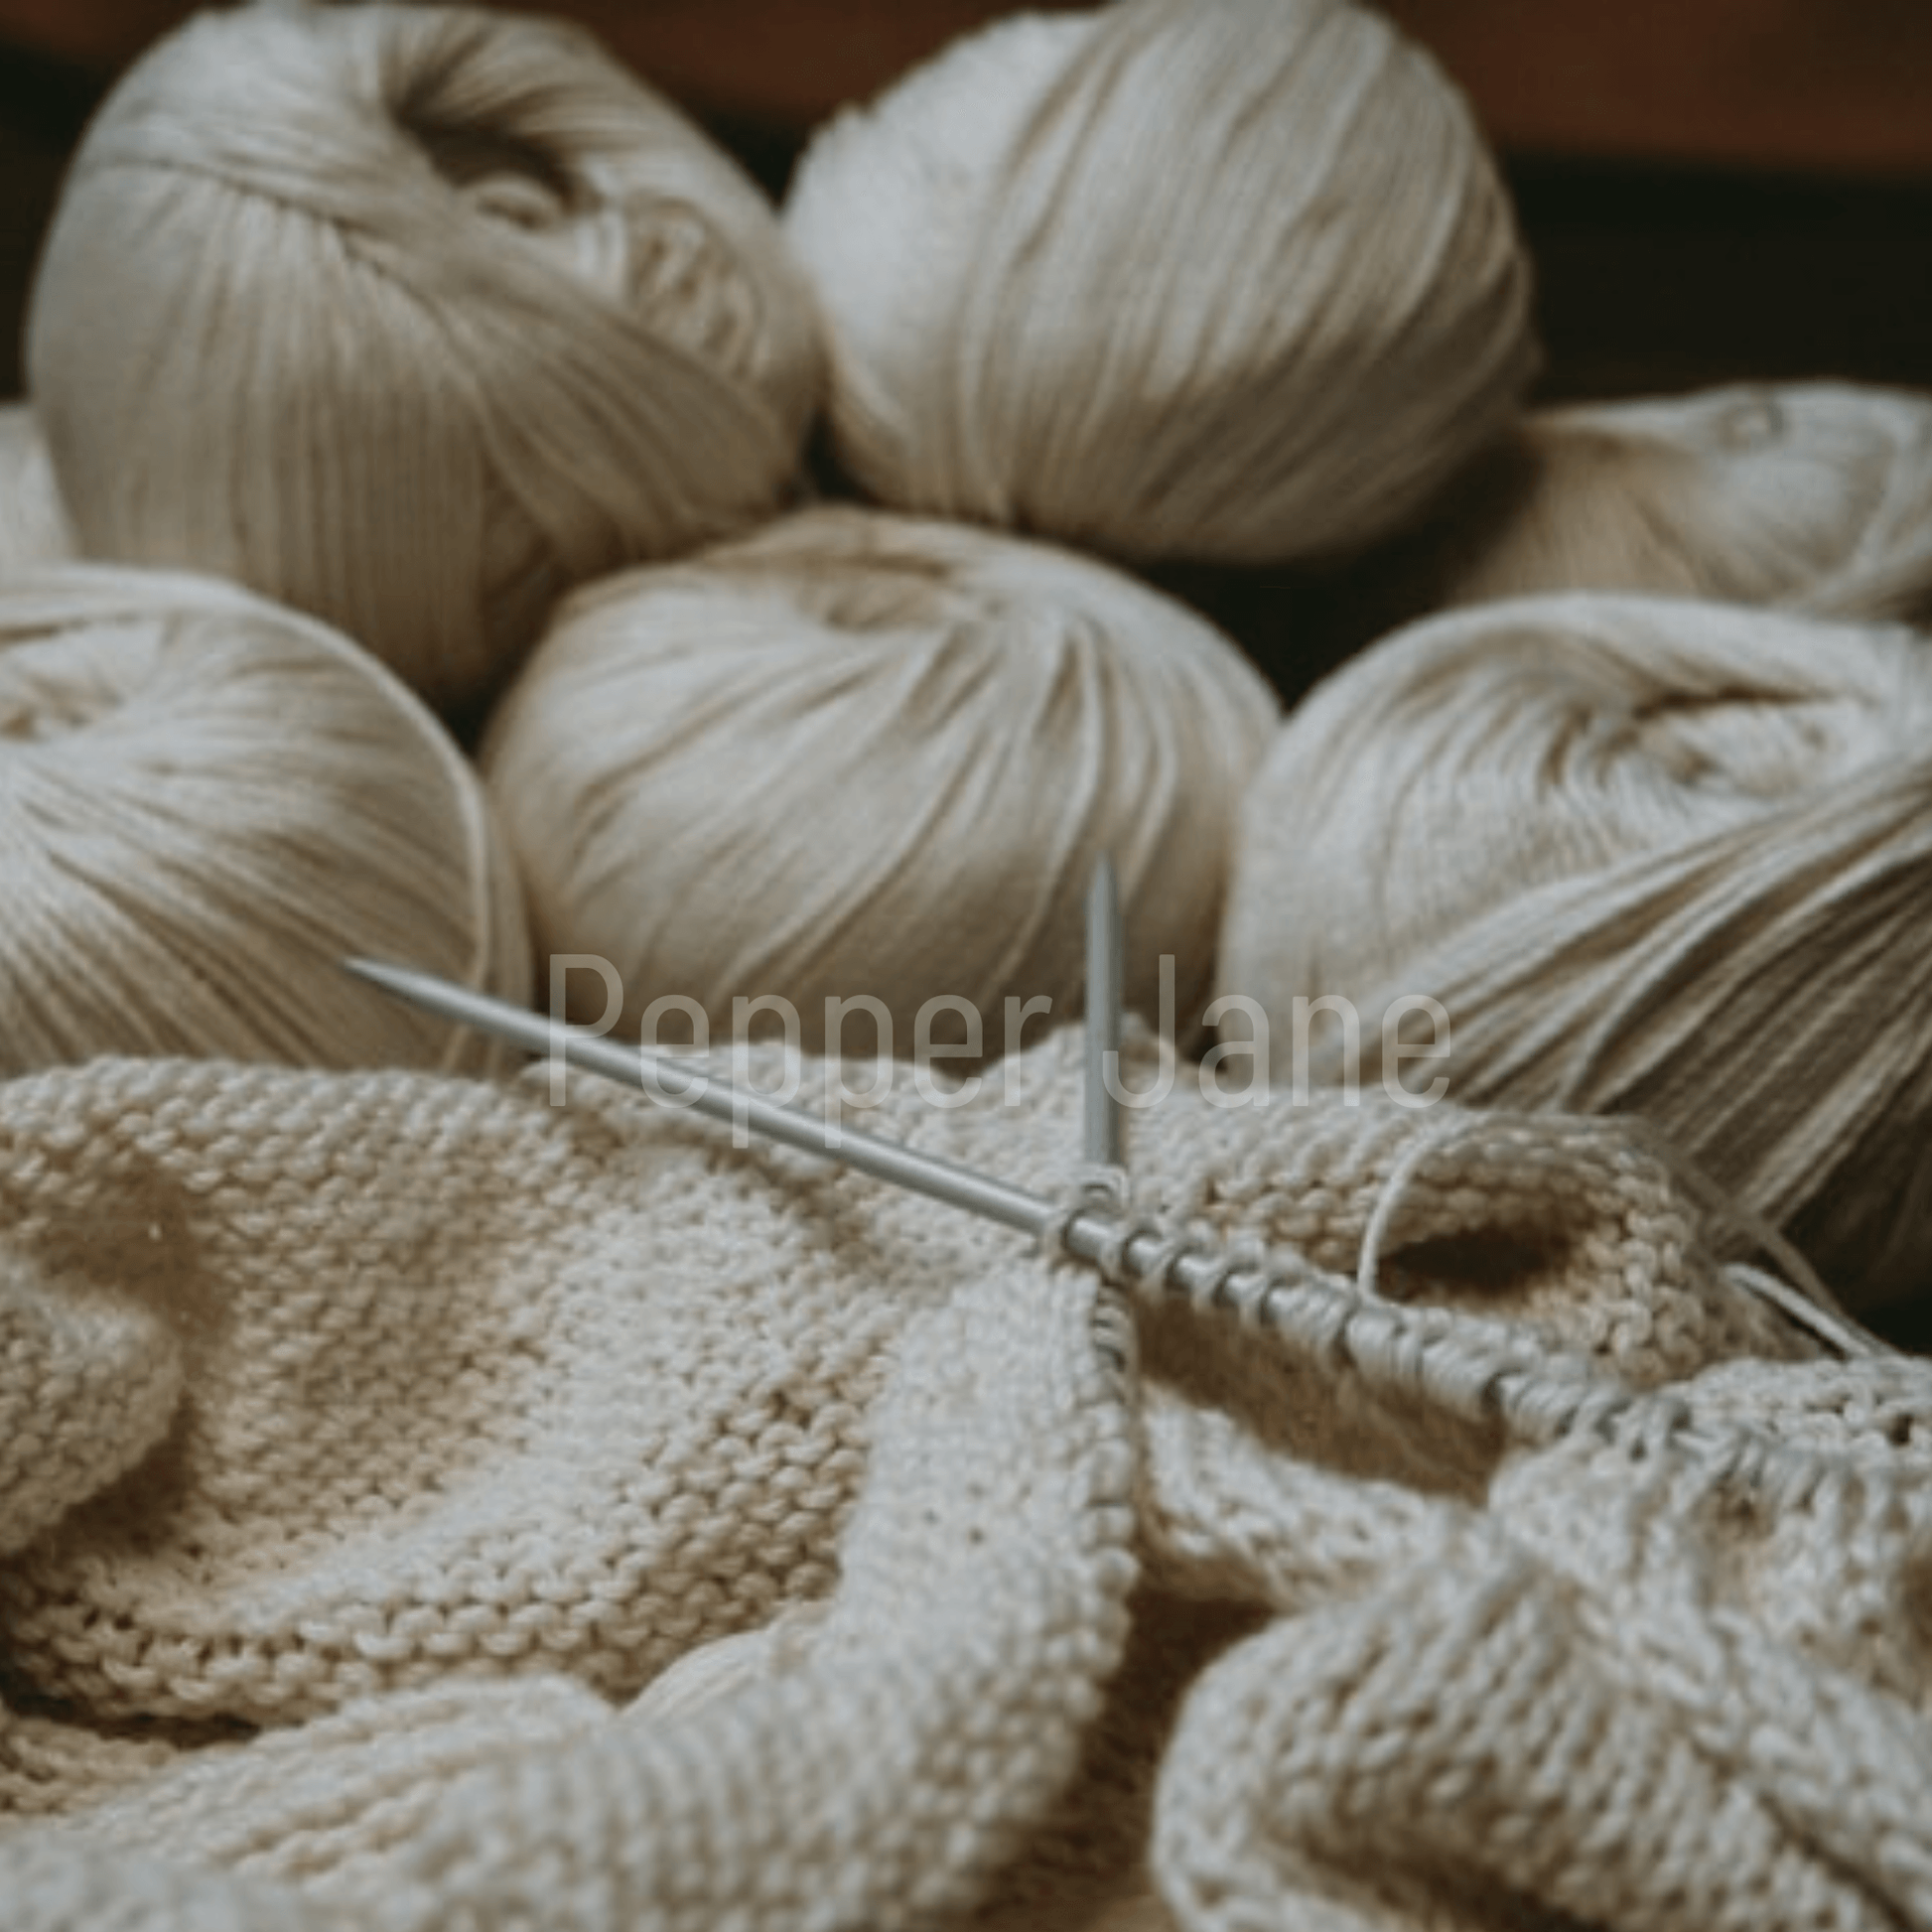 Warm Cashmere Fragrance Oil (Cashmere Glow BBW Type) - Pepper Jane's Colors and Scents